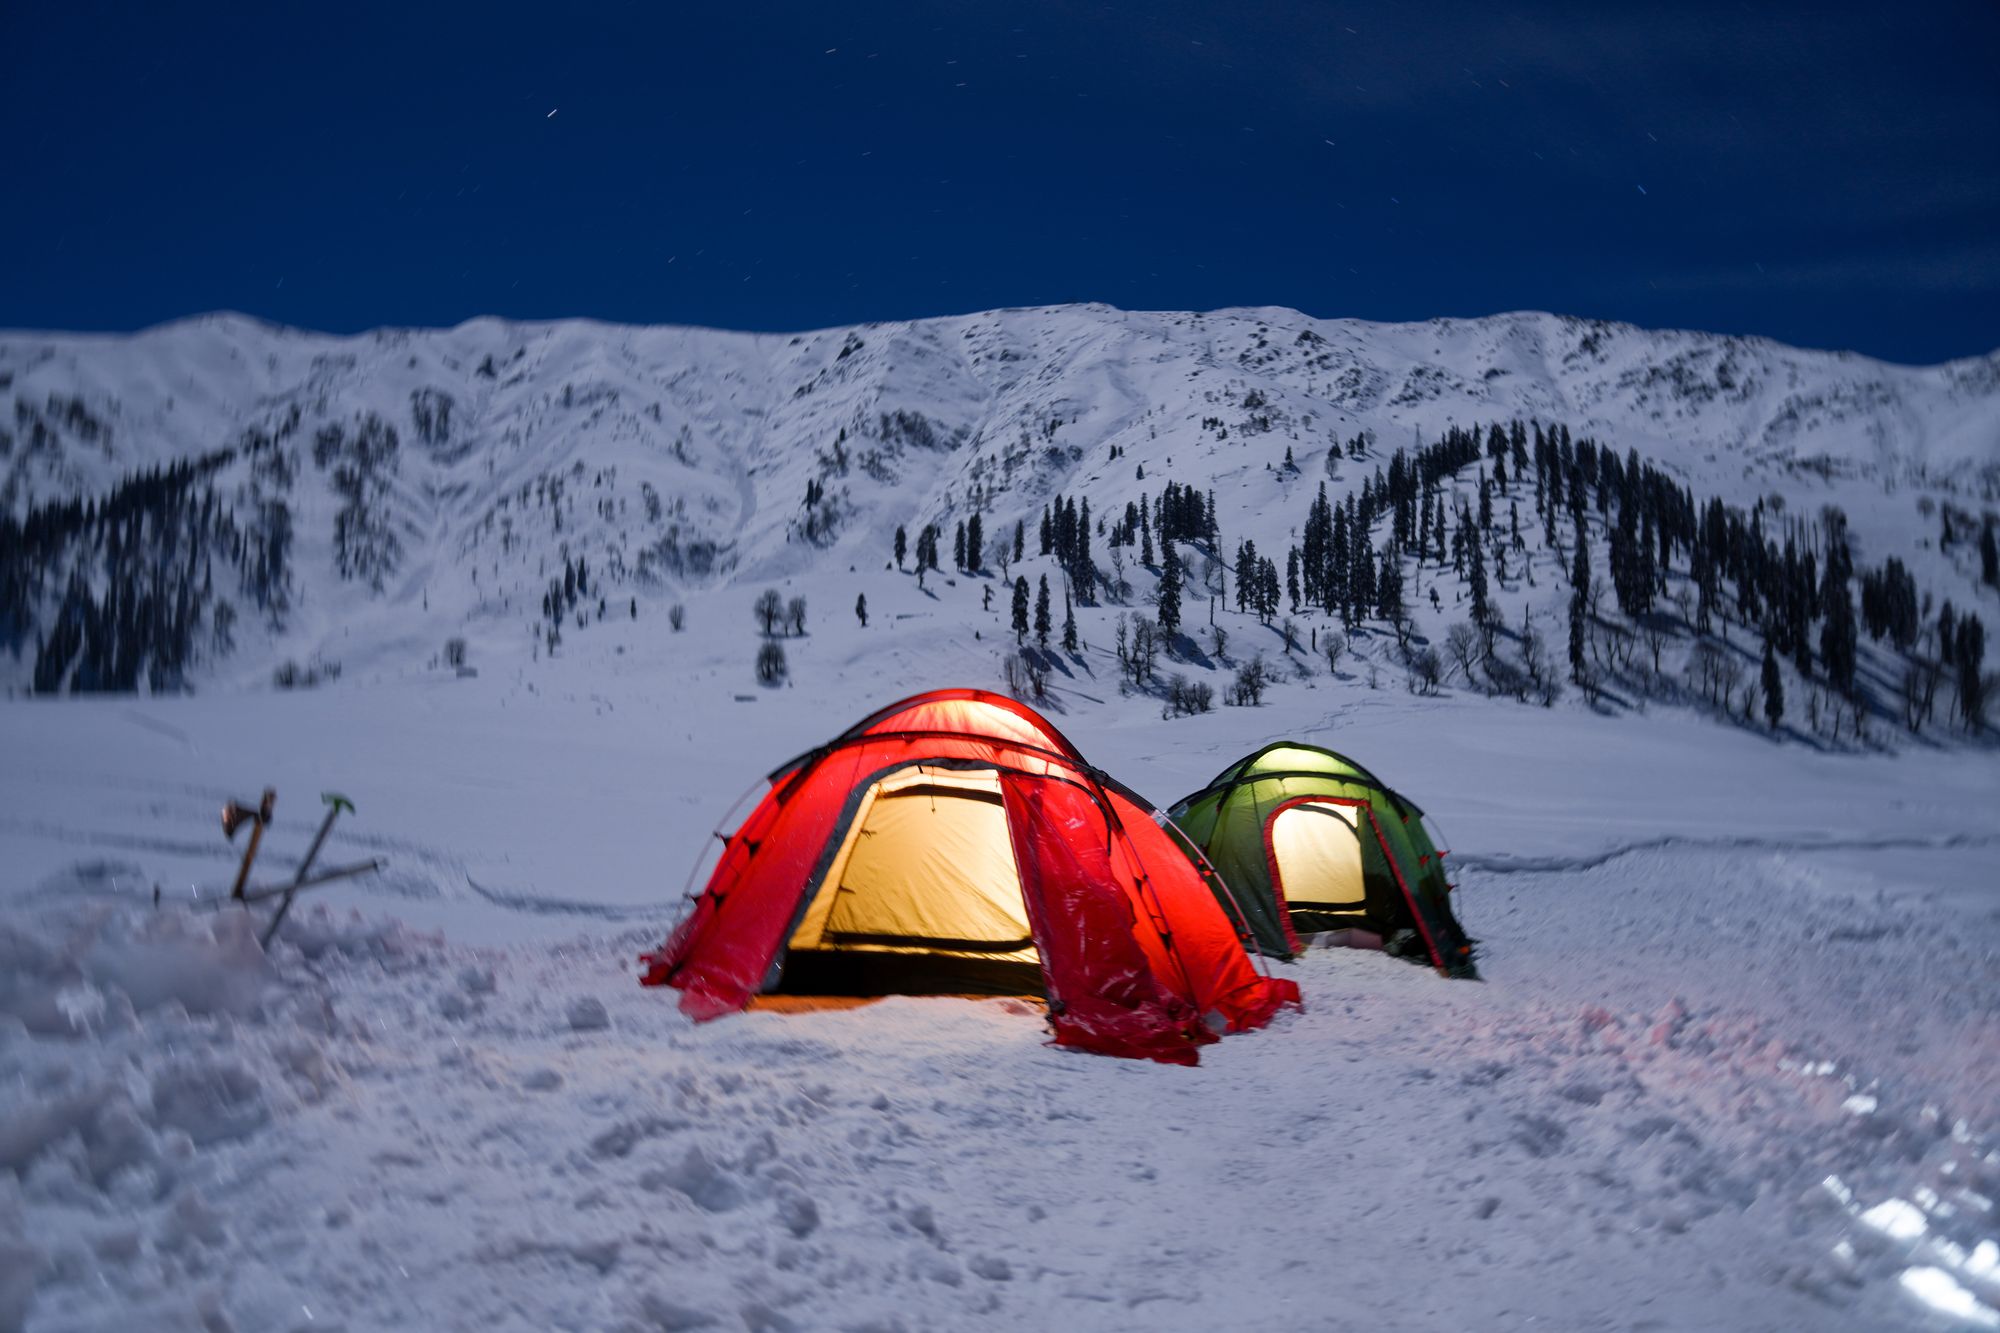 Leave the camp. Winter Camping. Tent pictures in Mountain Winter.